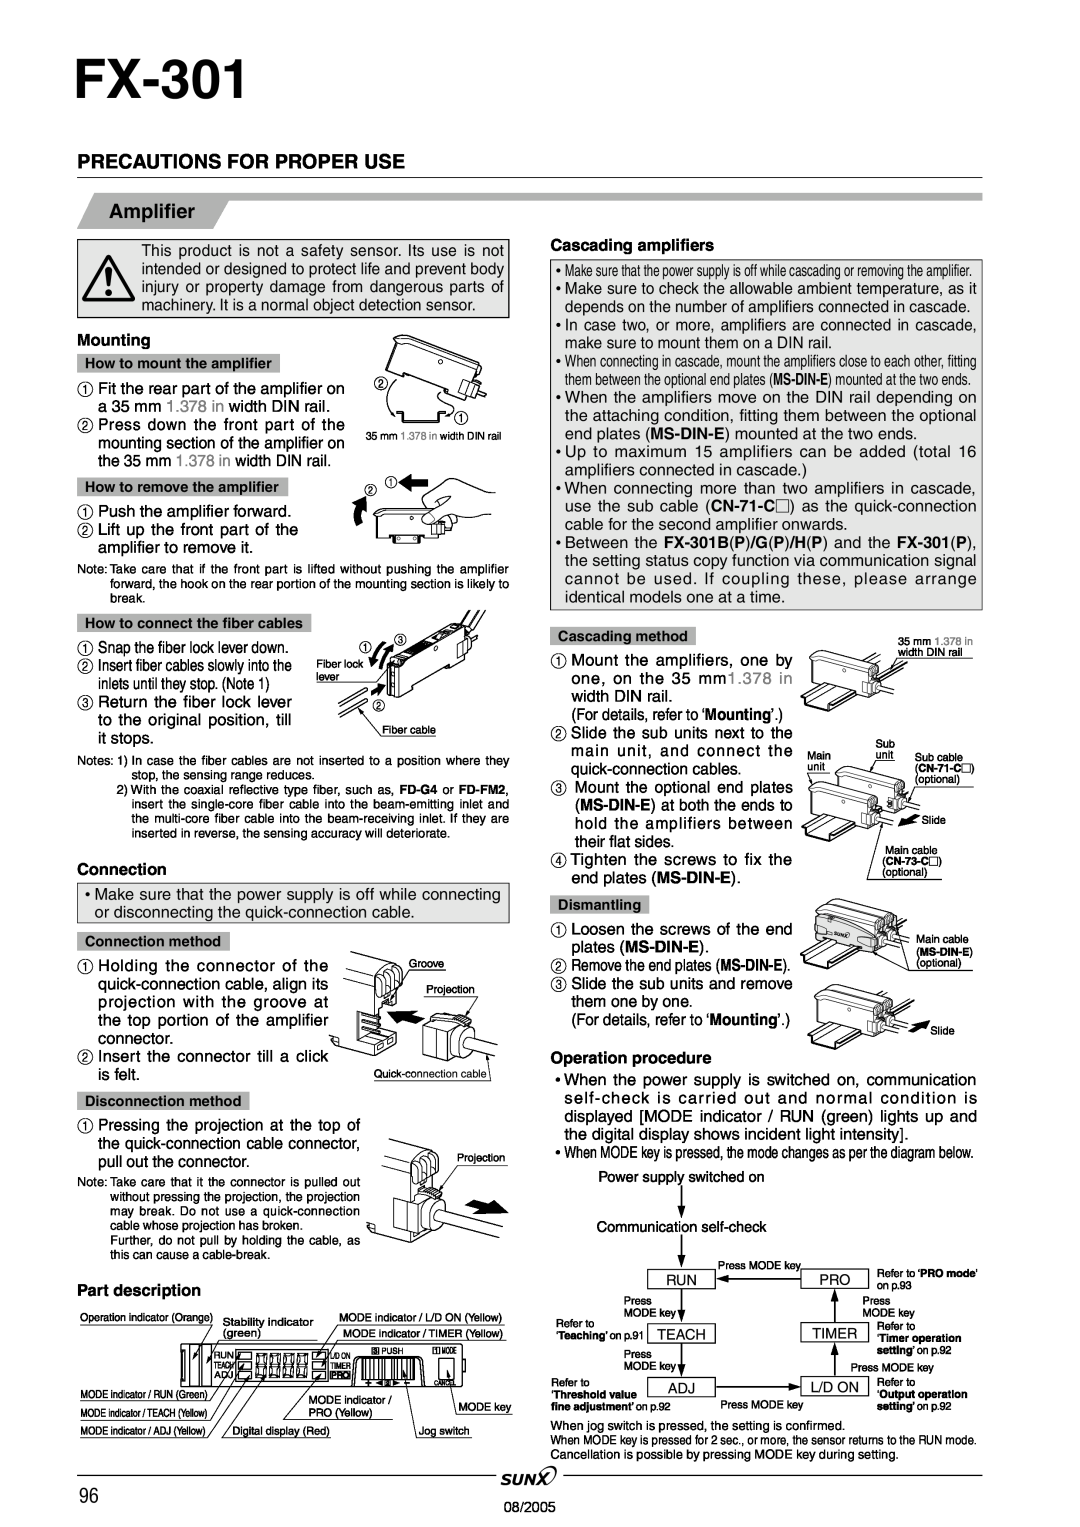 Panasonic FX-301 Precautions For Proper Use, Amplifier, Mounting, Connection, Cascading amplifiers, Operation procedure 